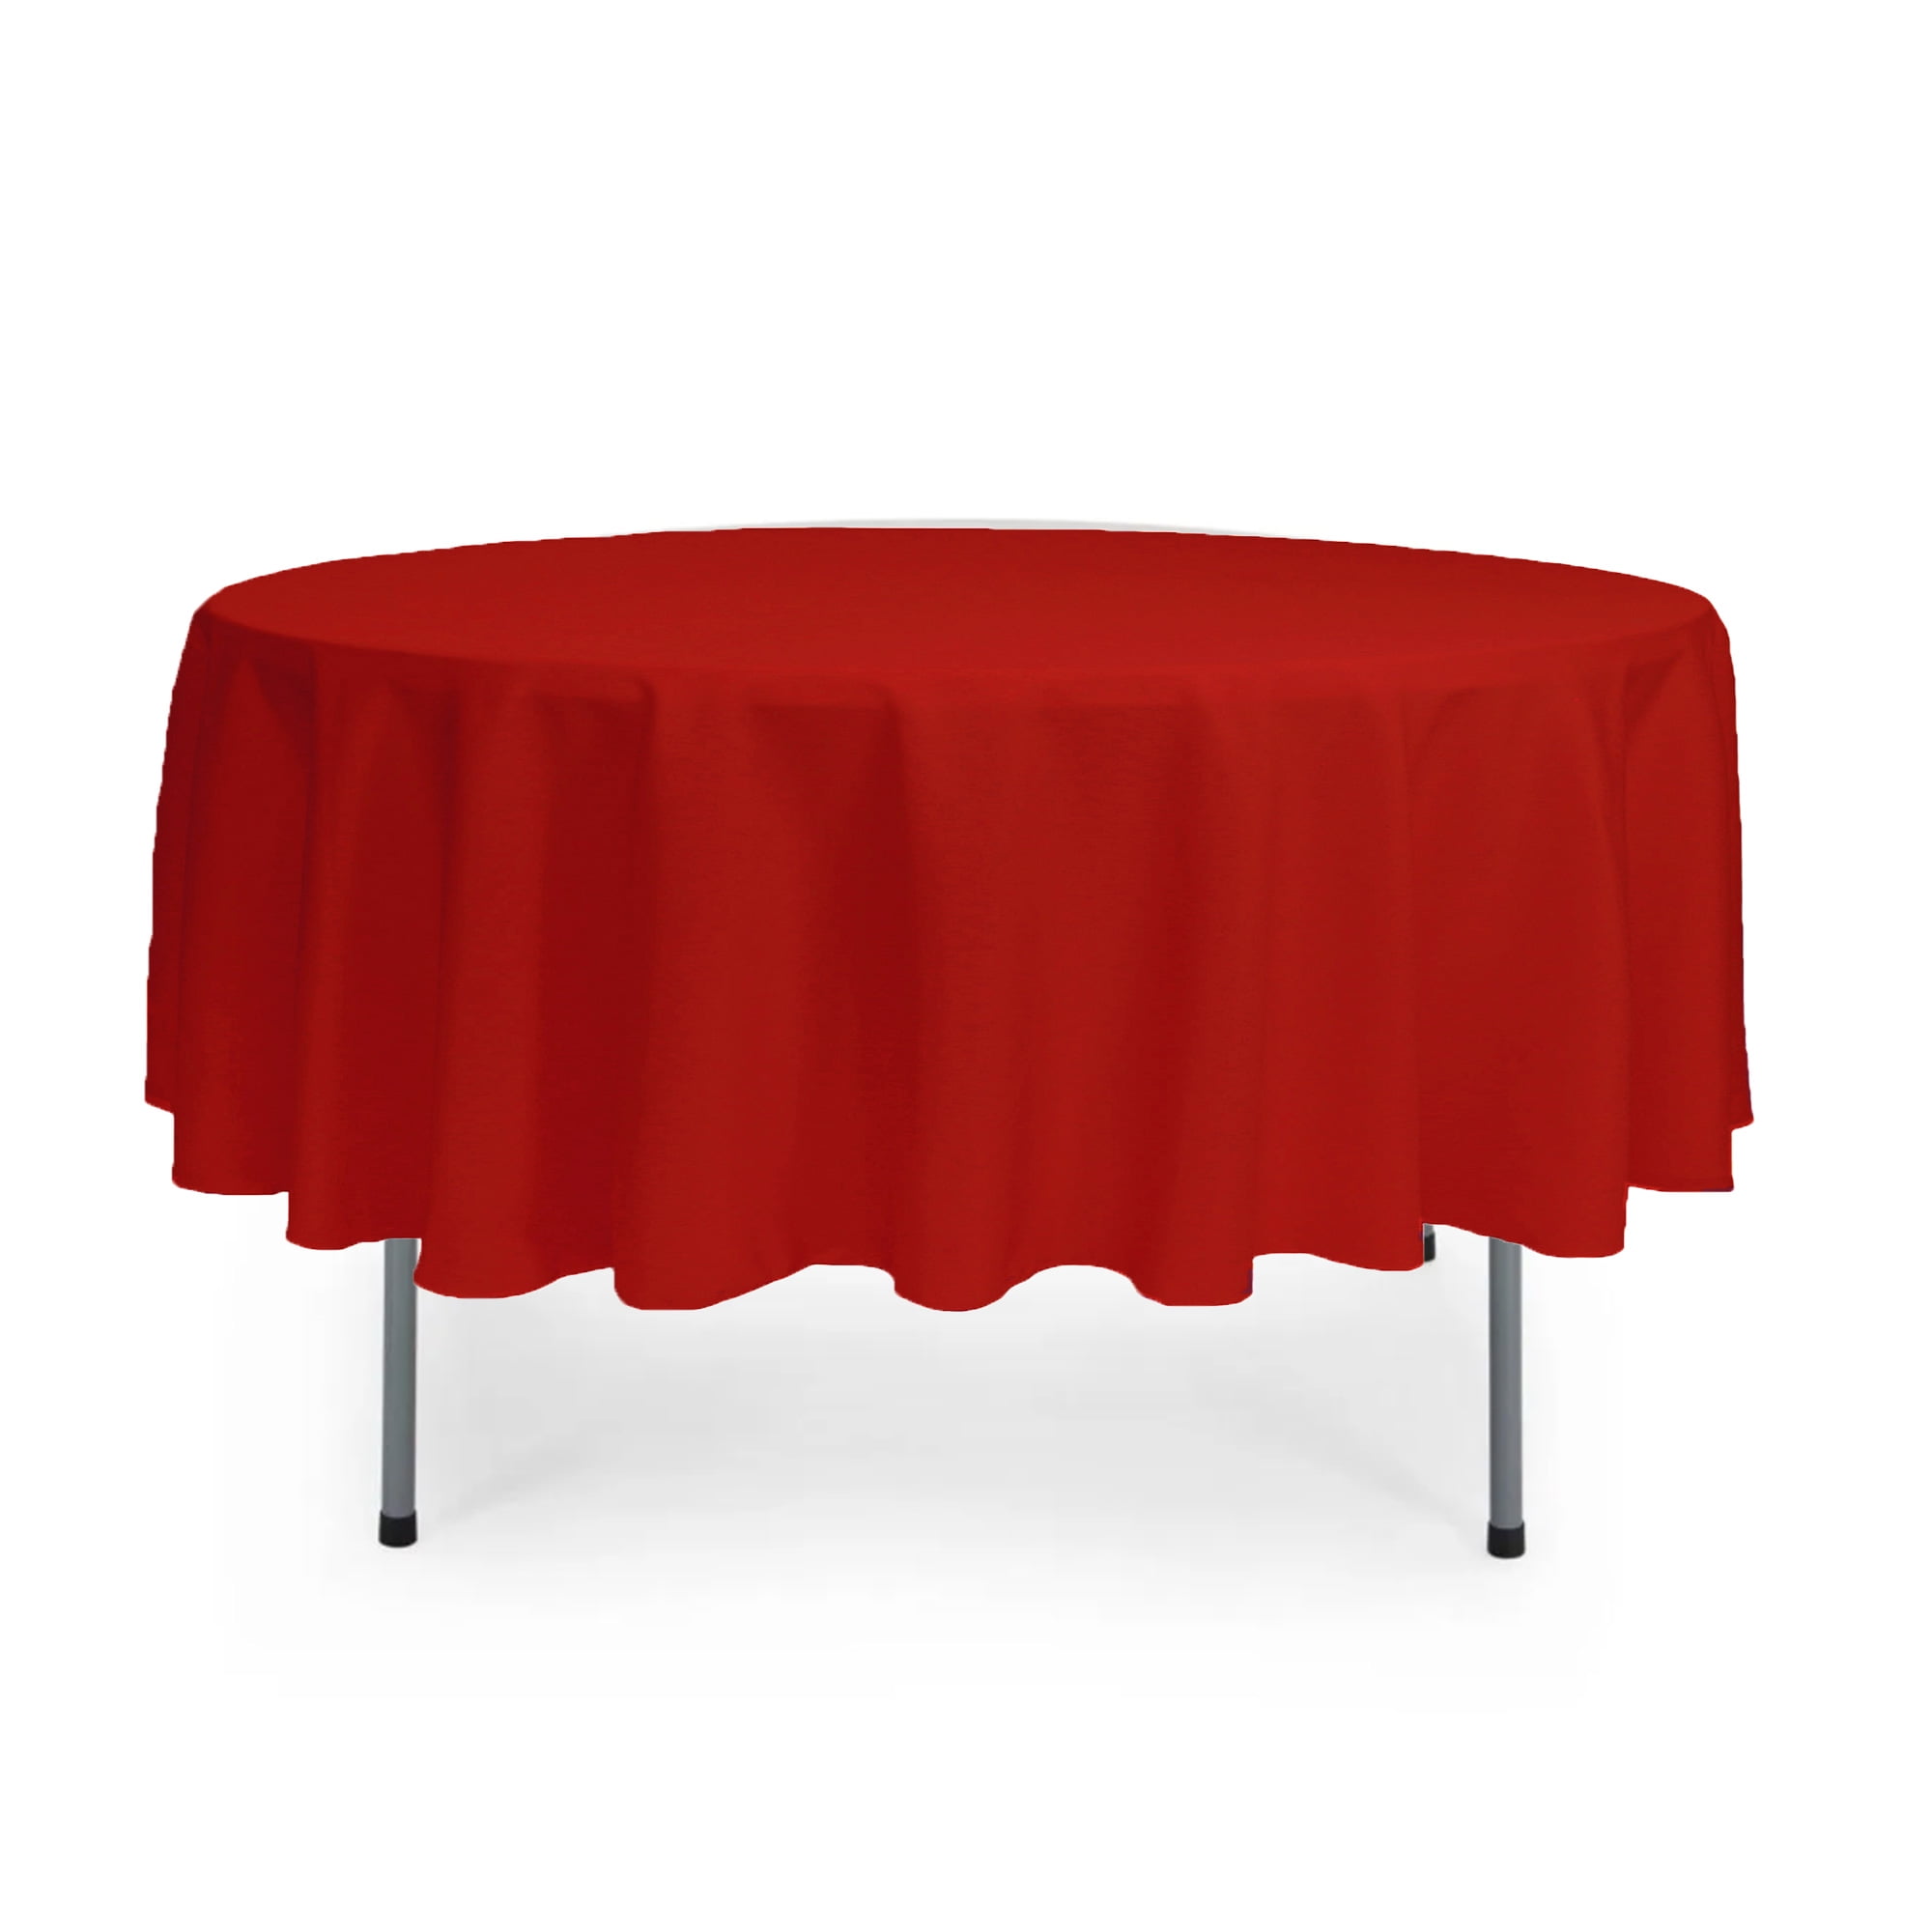 90 Inch Round Polyester Tablecloth Red, How Big Is A 90 Inch Round Table Pad